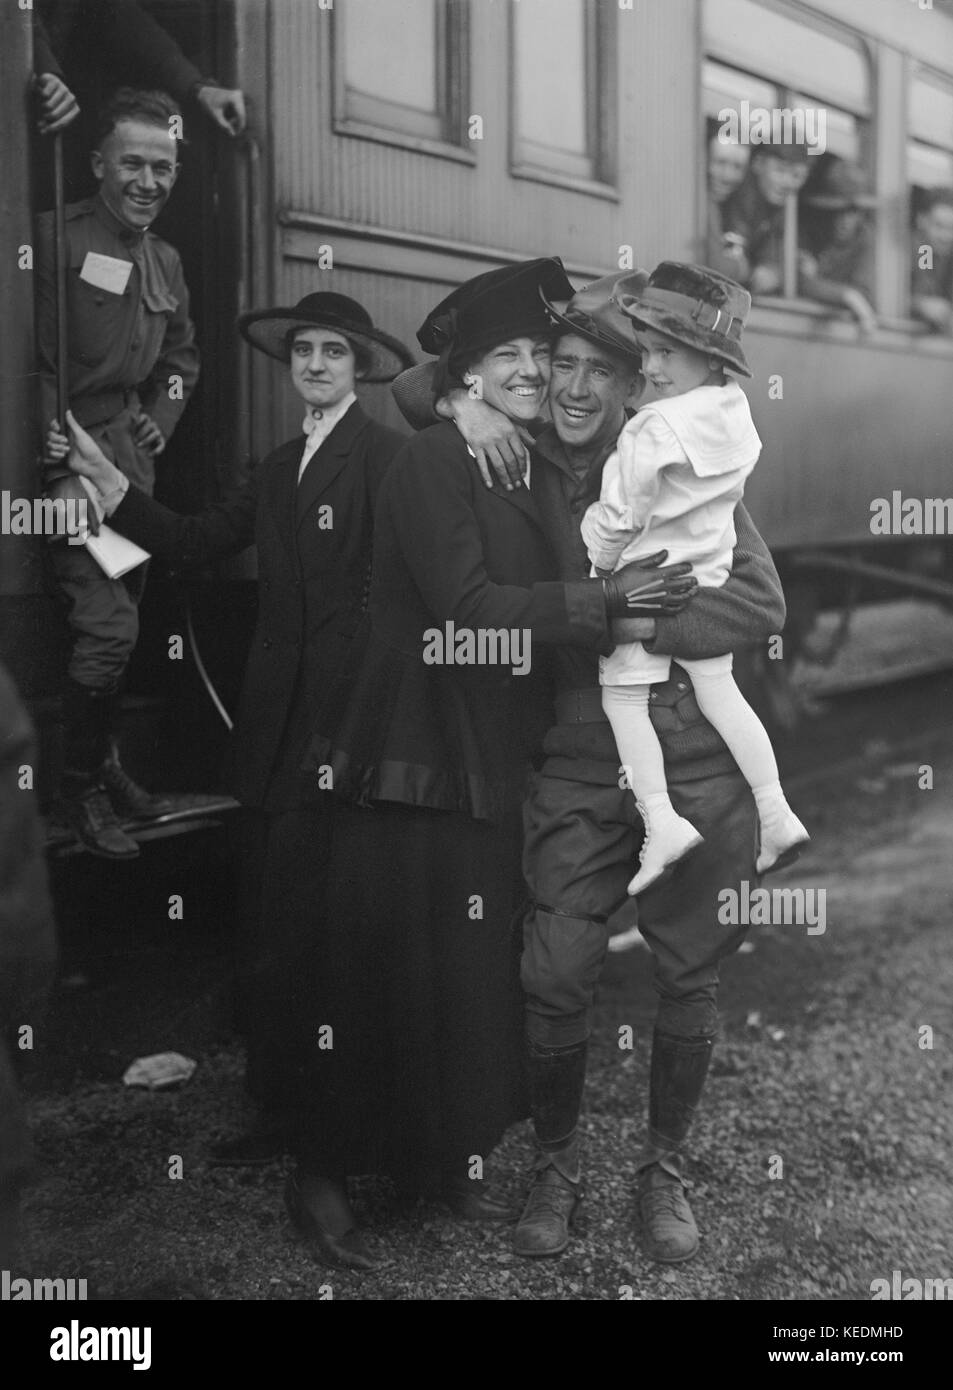 U.S Army Troops Saying Farewell Before Heading off to Military Training Camp, Harris & Ewing, 1917 Stock Photo